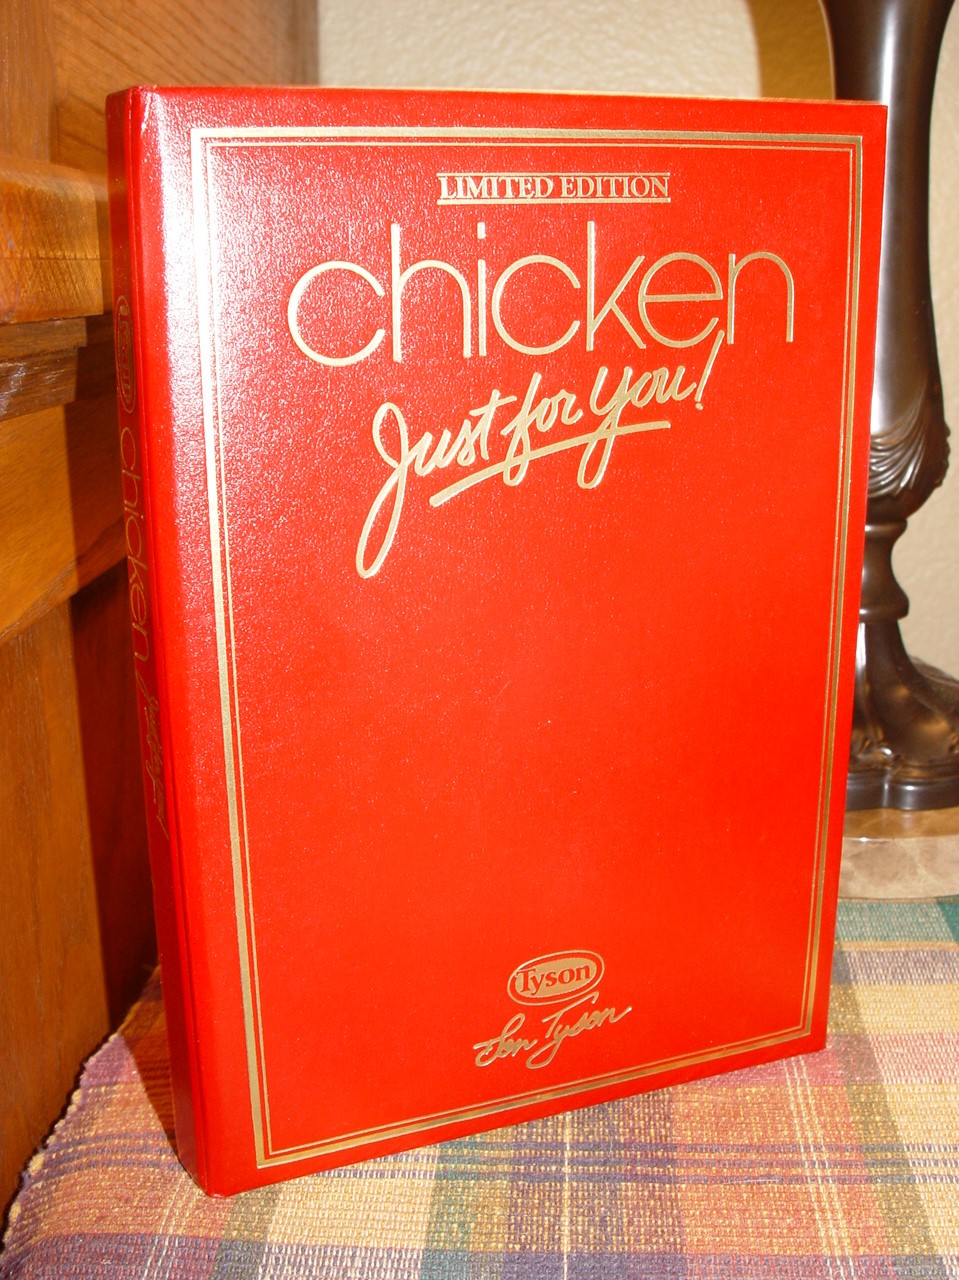 Tyson Chicken Just For You Cookbook 1984,
                        Limited Edition